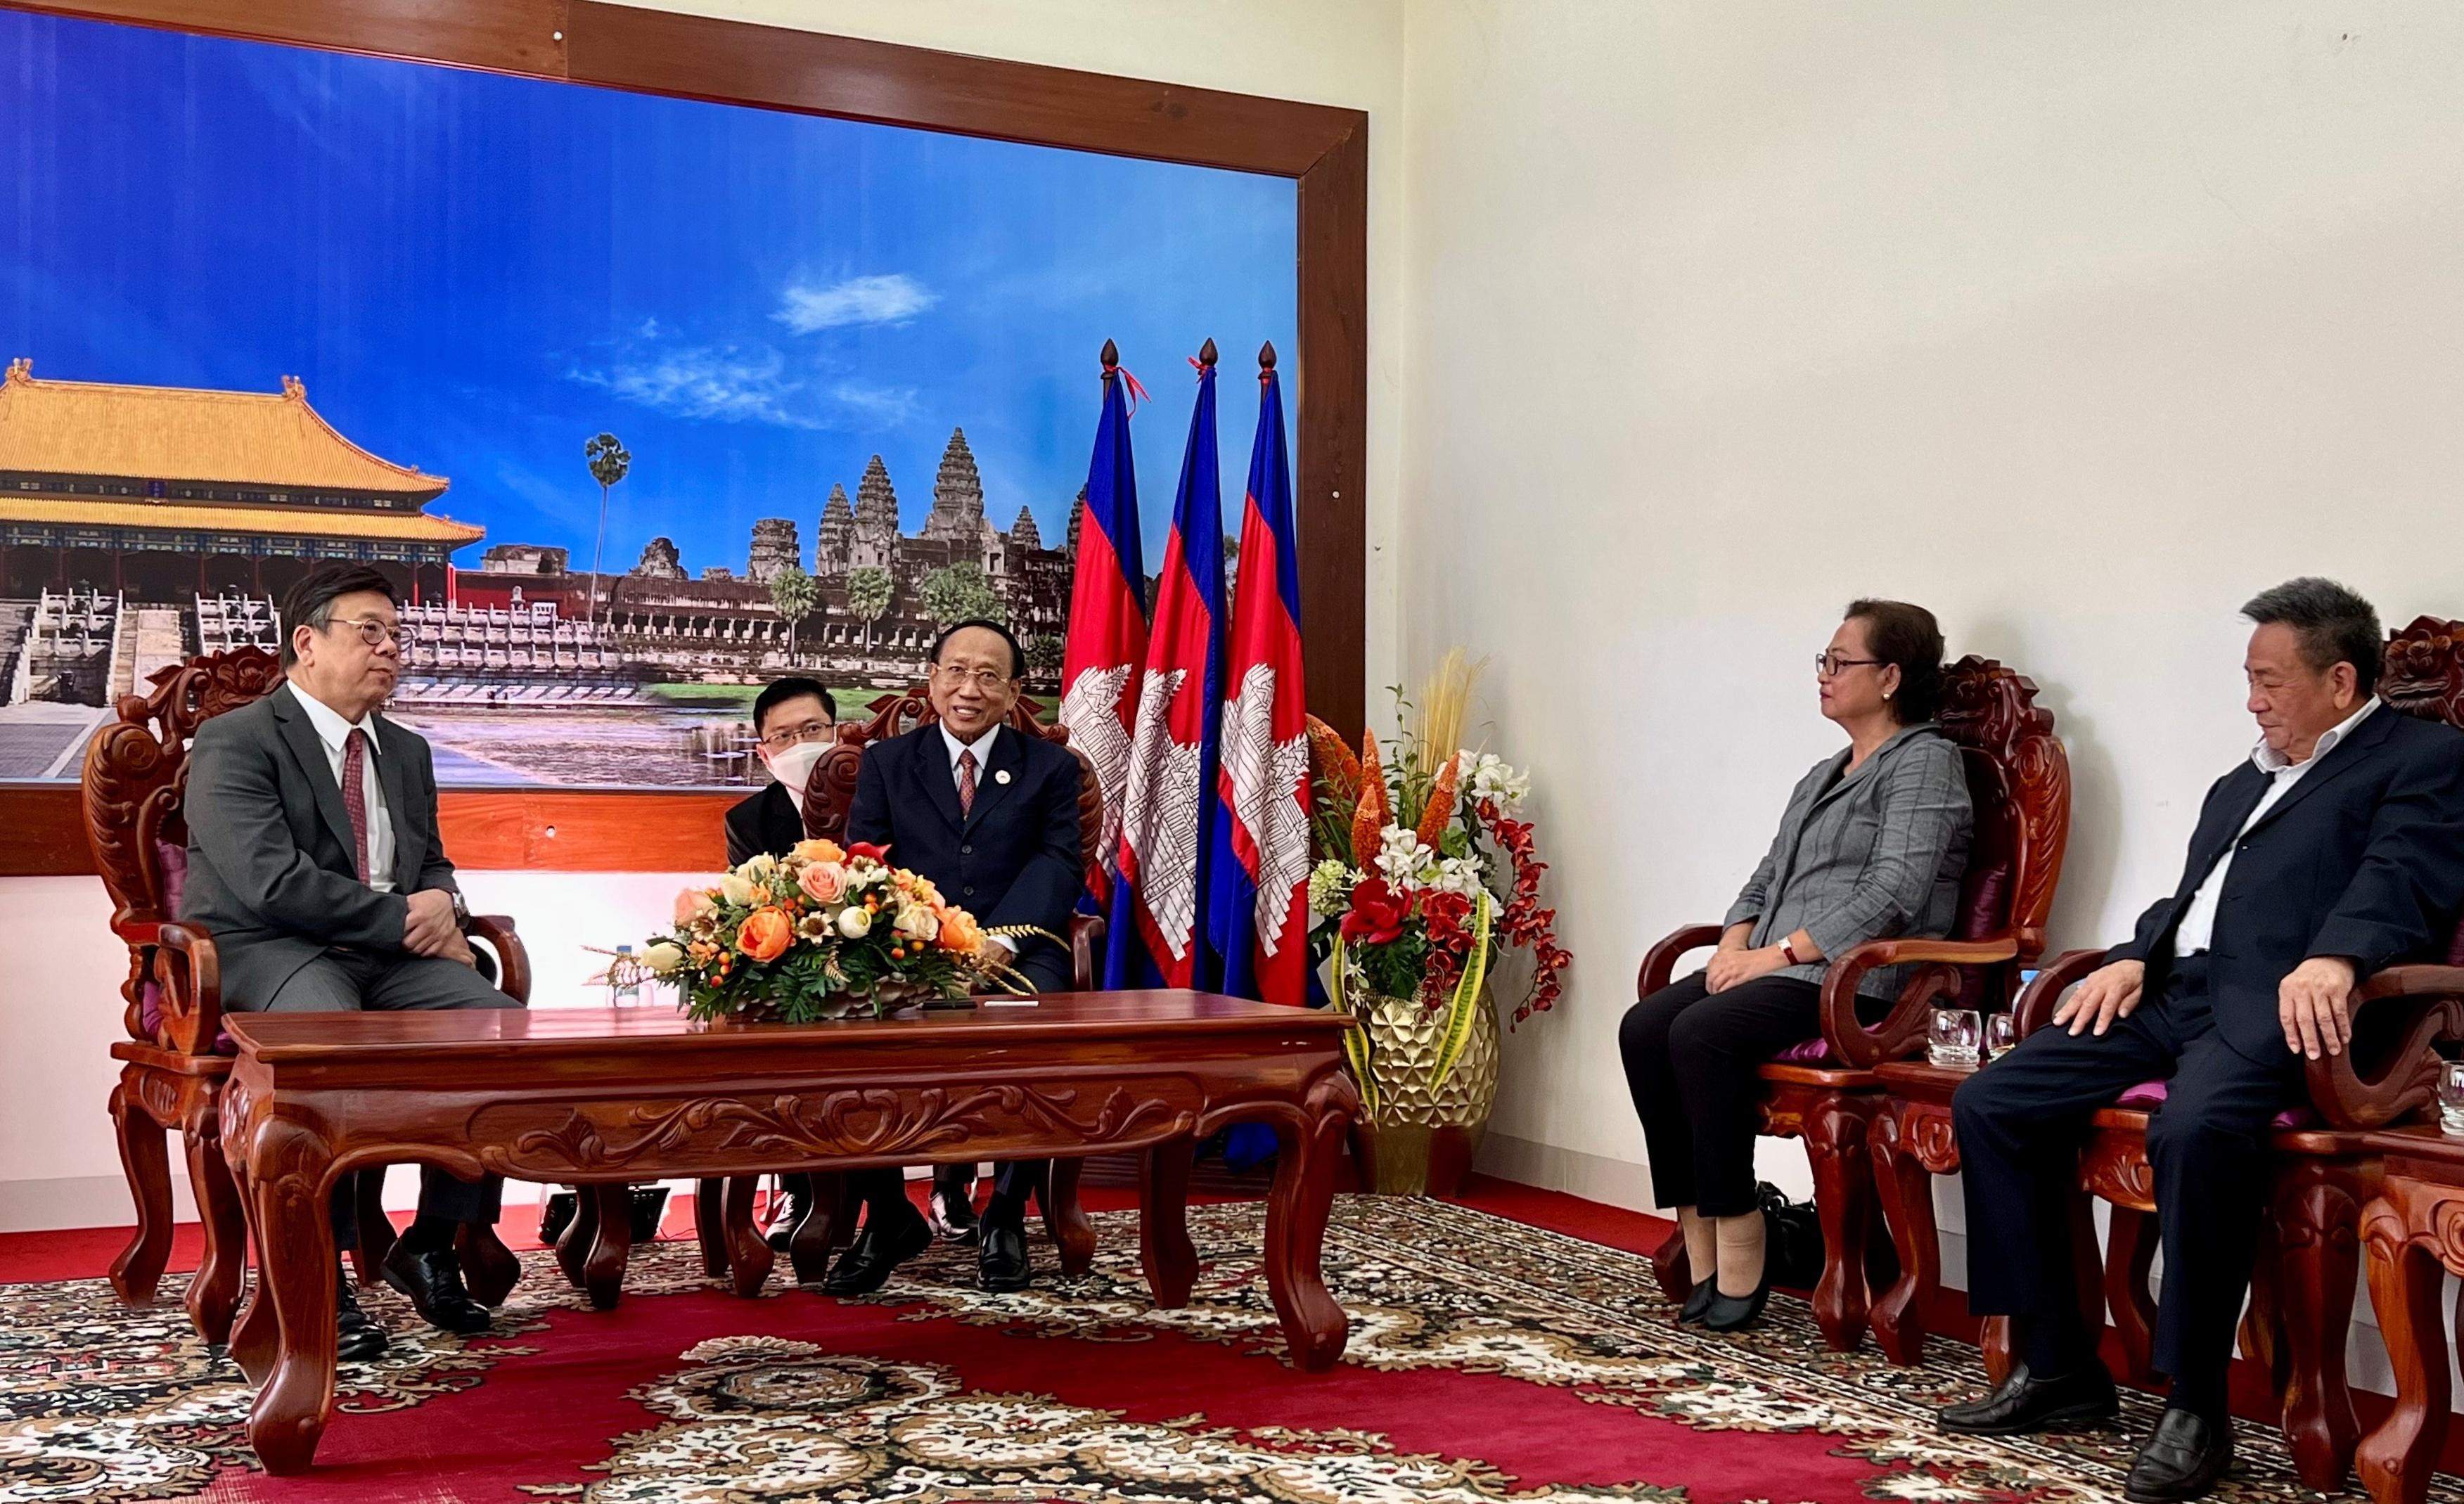 The Secretary for Commerce and Economic Development, Mr Algernon Yau (first left), met with the Chairman of the Constitutional Council of Cambodia, Mr Ek Sam Ol (third right), and representatives from local Hong Kong Business Association in Phnom Penh, Cambodia, yesterday (September 16).